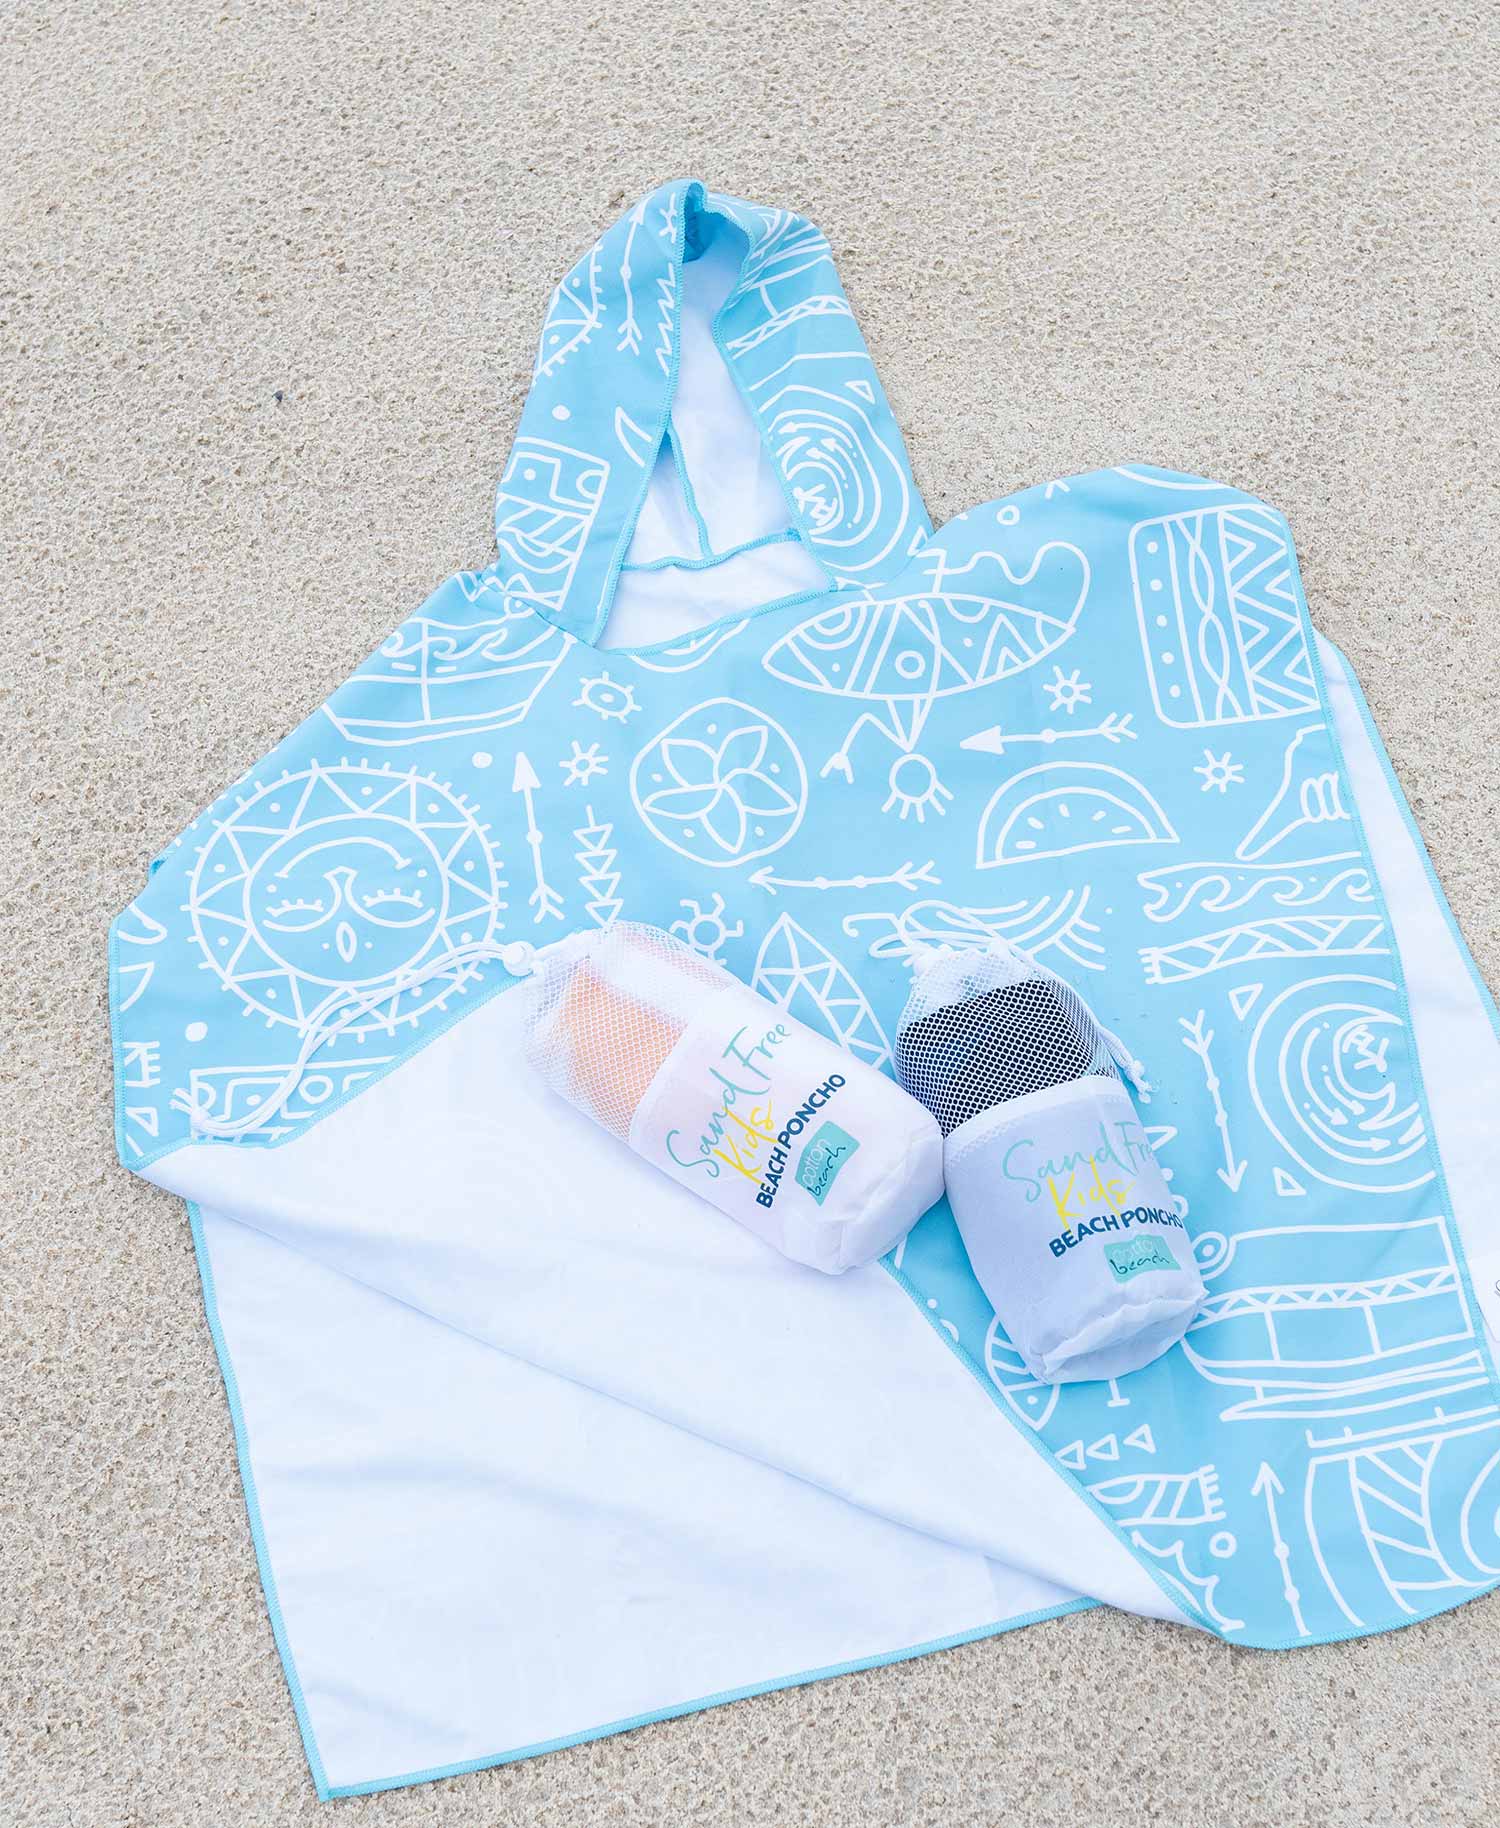 COTTON BEACH SAND FREE YOUTH HOODED PONCHO